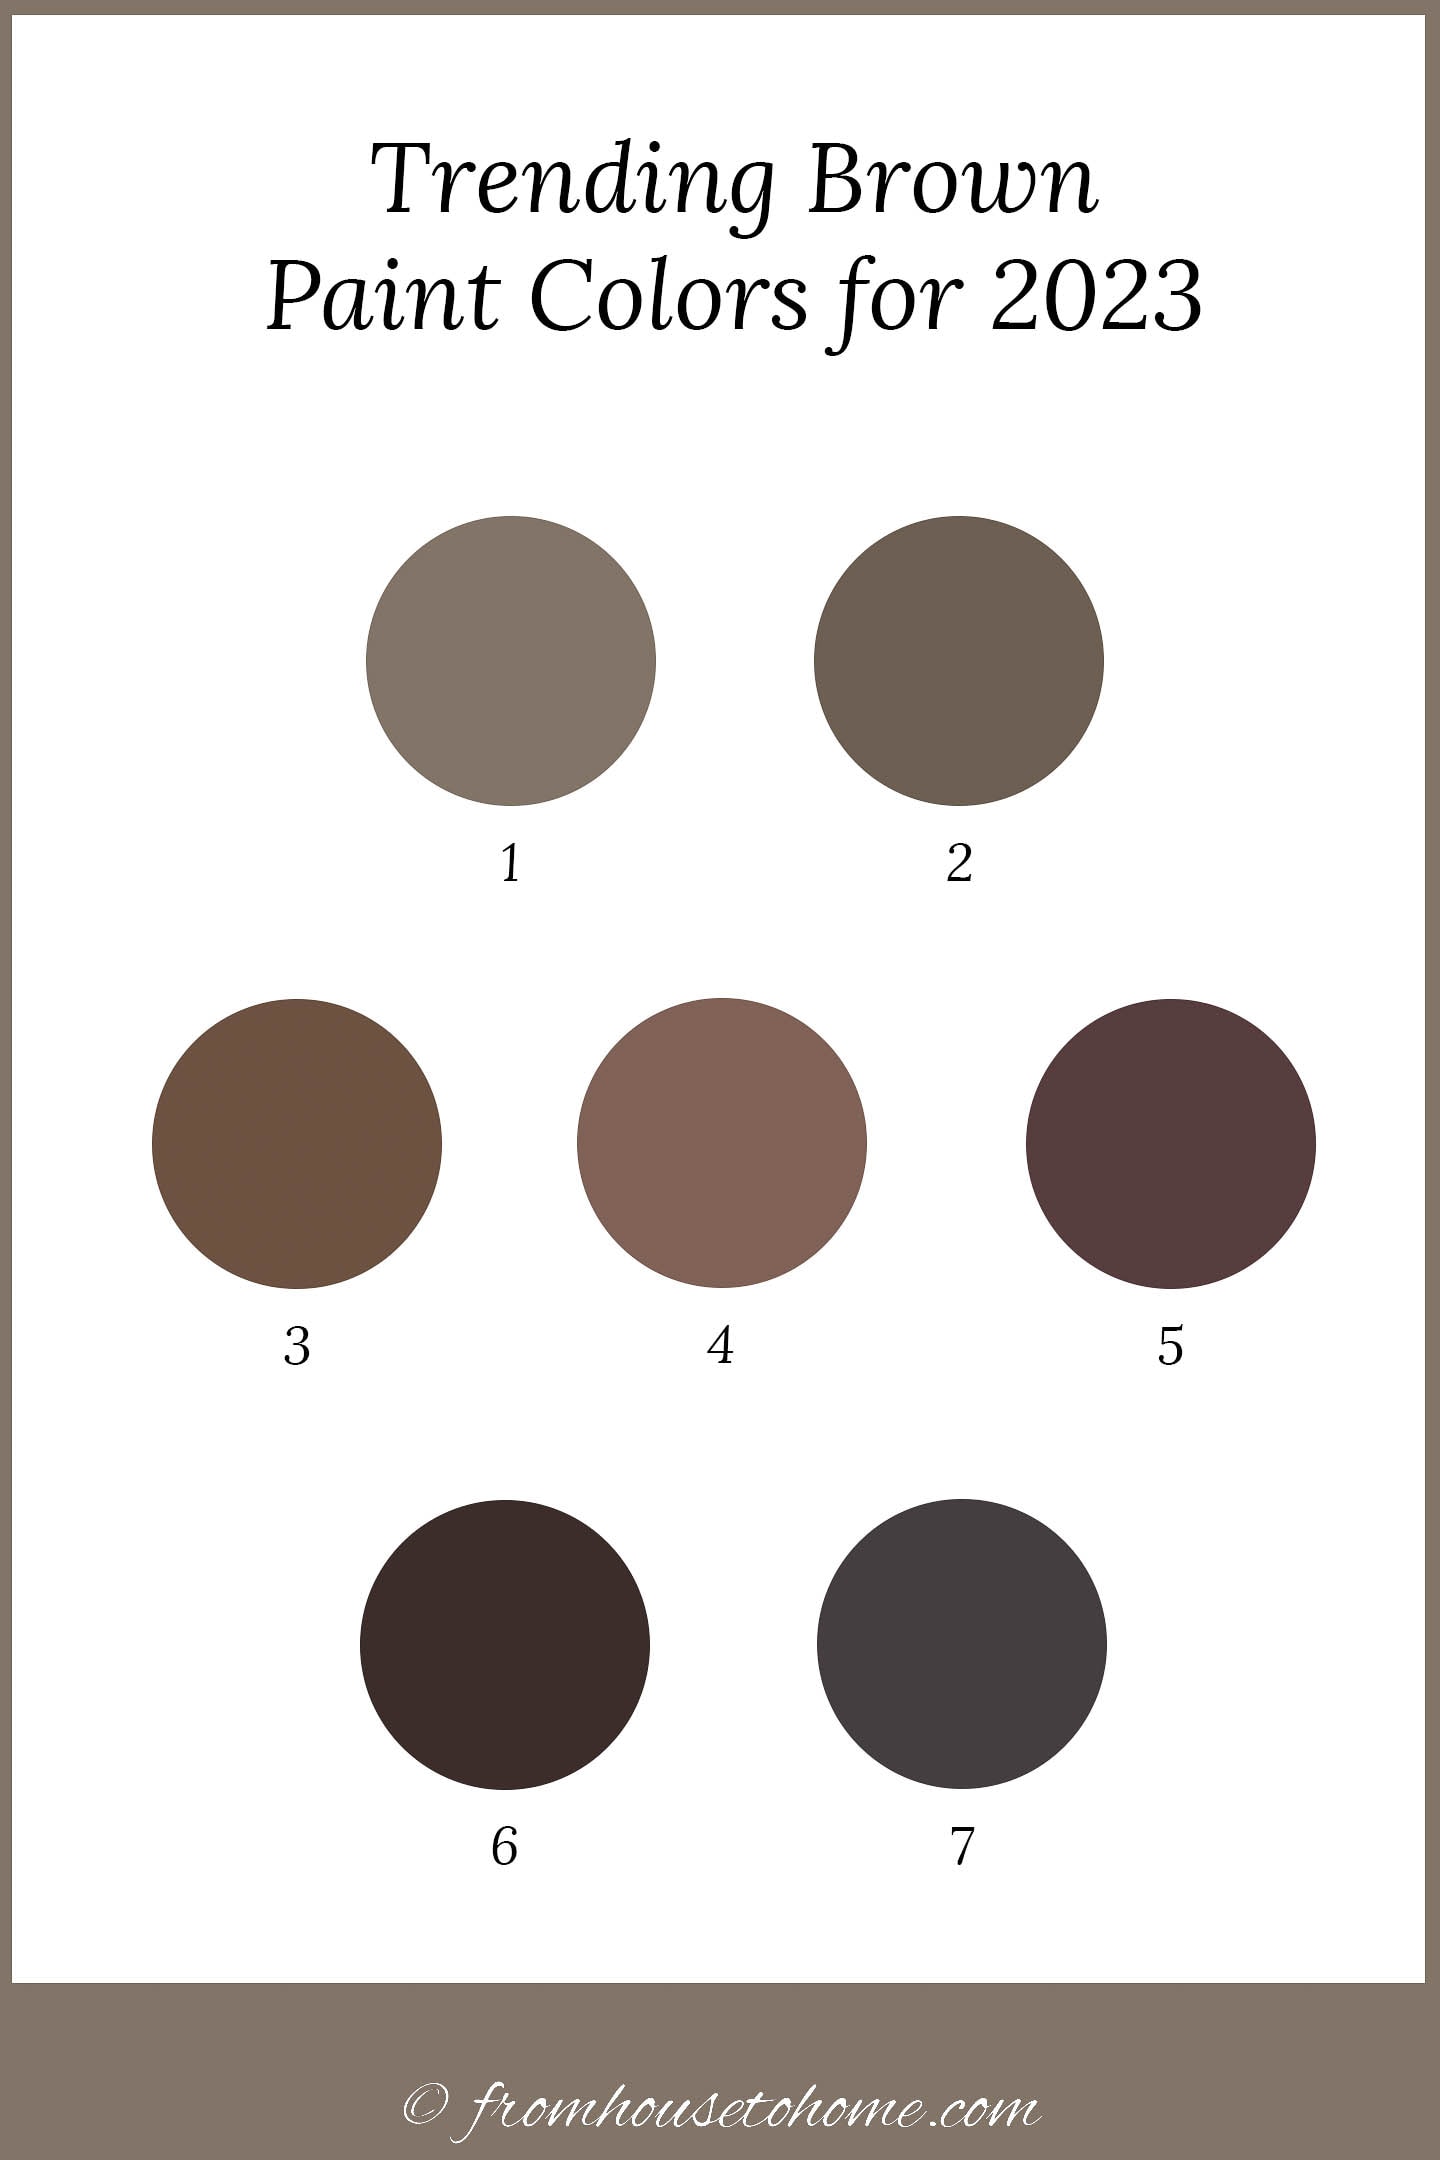 7 swatches of trending brown paint colors